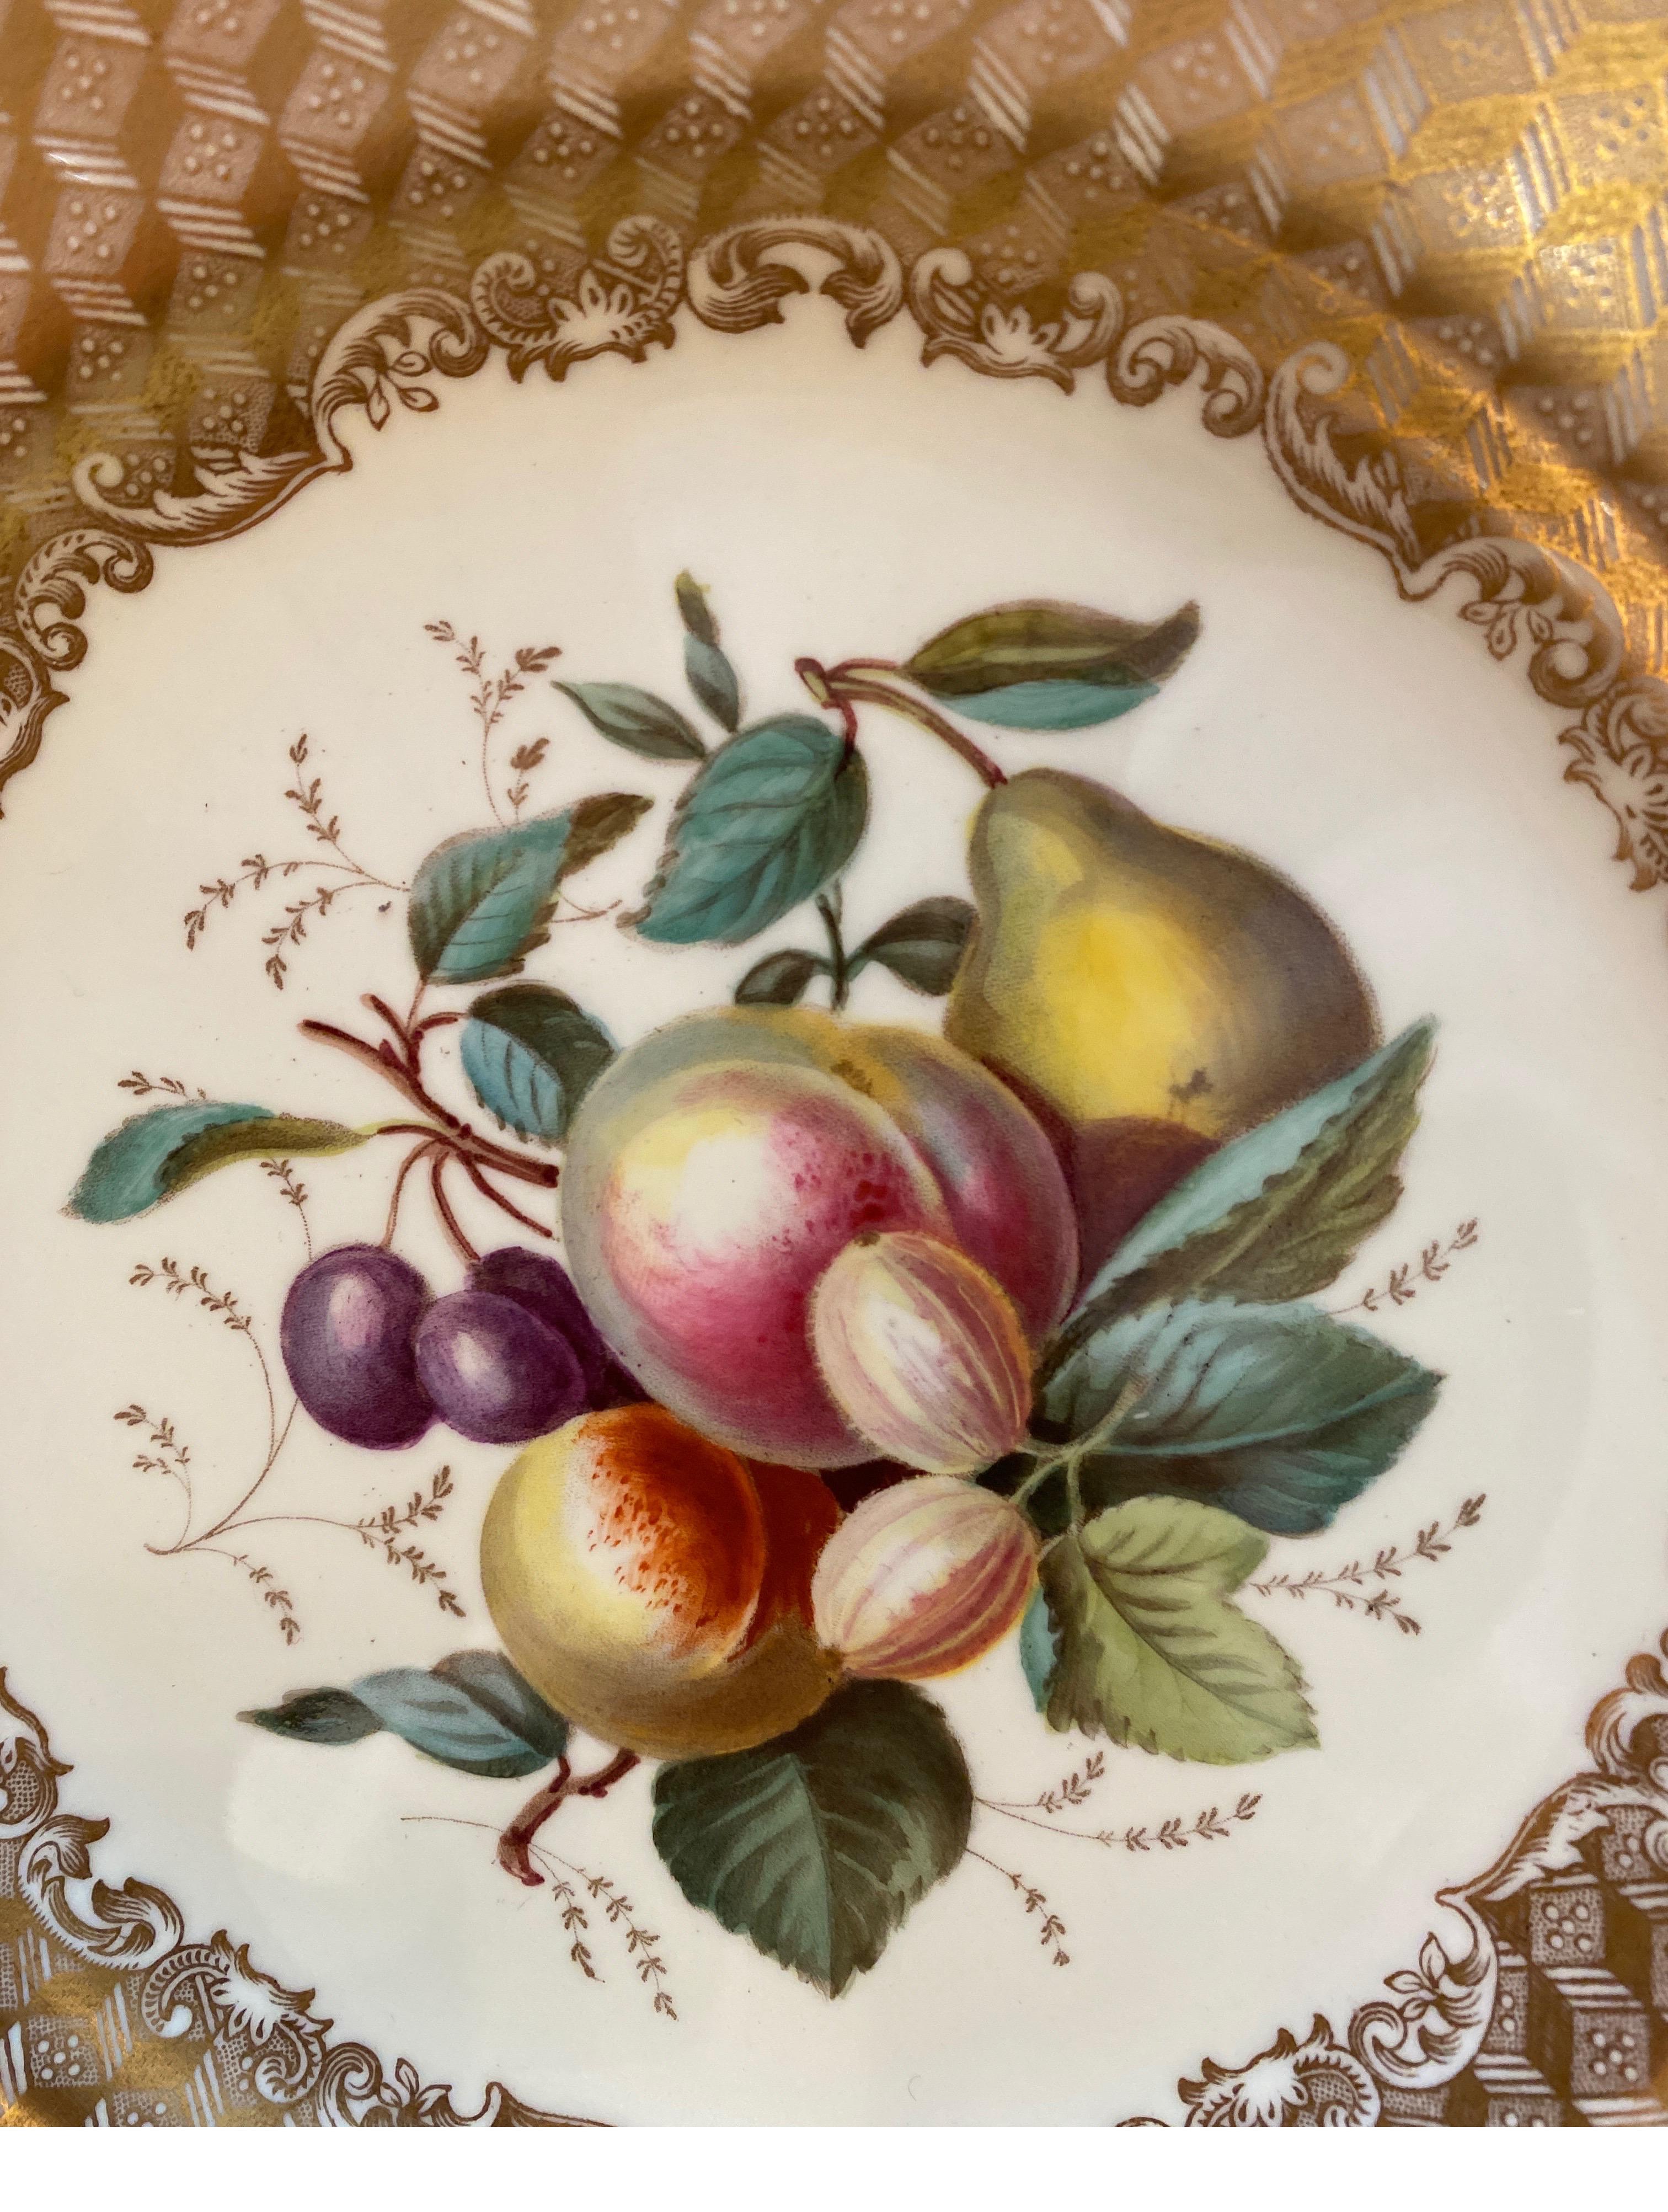 Set of 10 Antique English Copeland Spode Hand Painted Fruit Plates In Excellent Condition For Sale In Lambertville, NJ